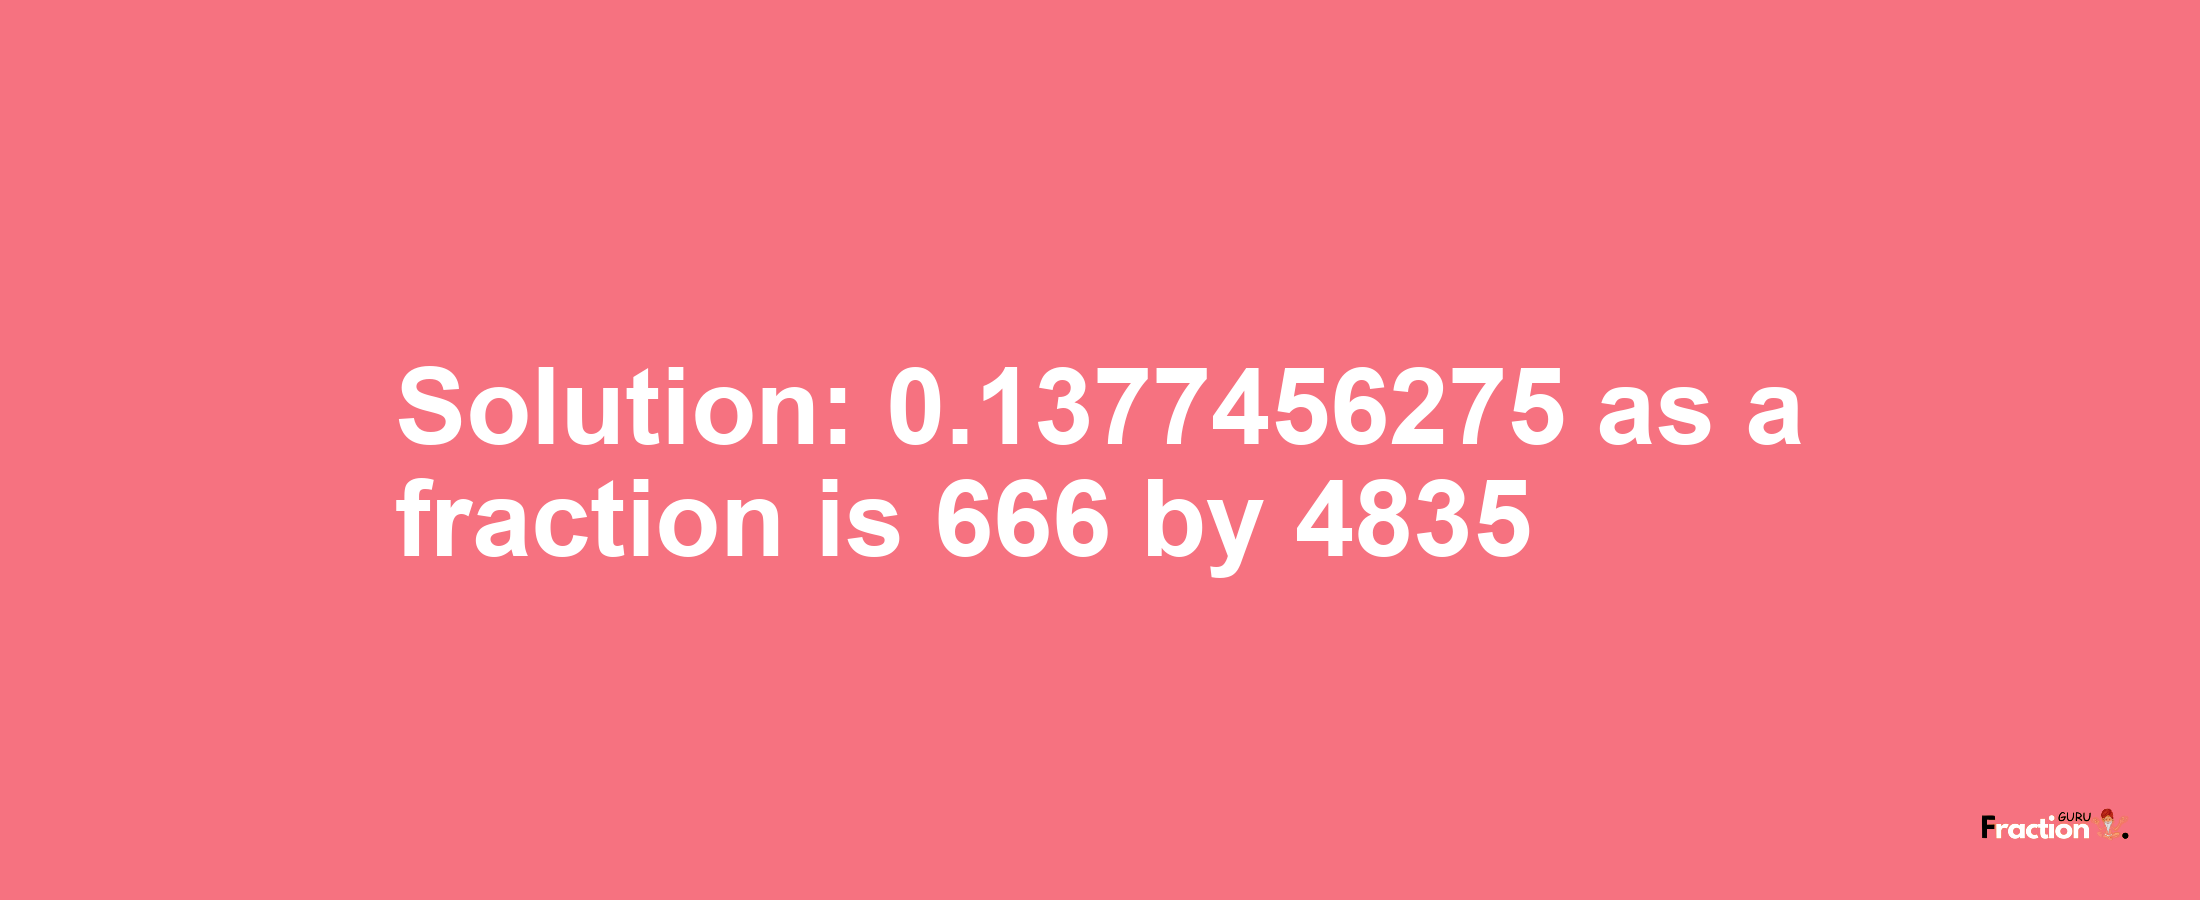 Solution:0.1377456275 as a fraction is 666/4835